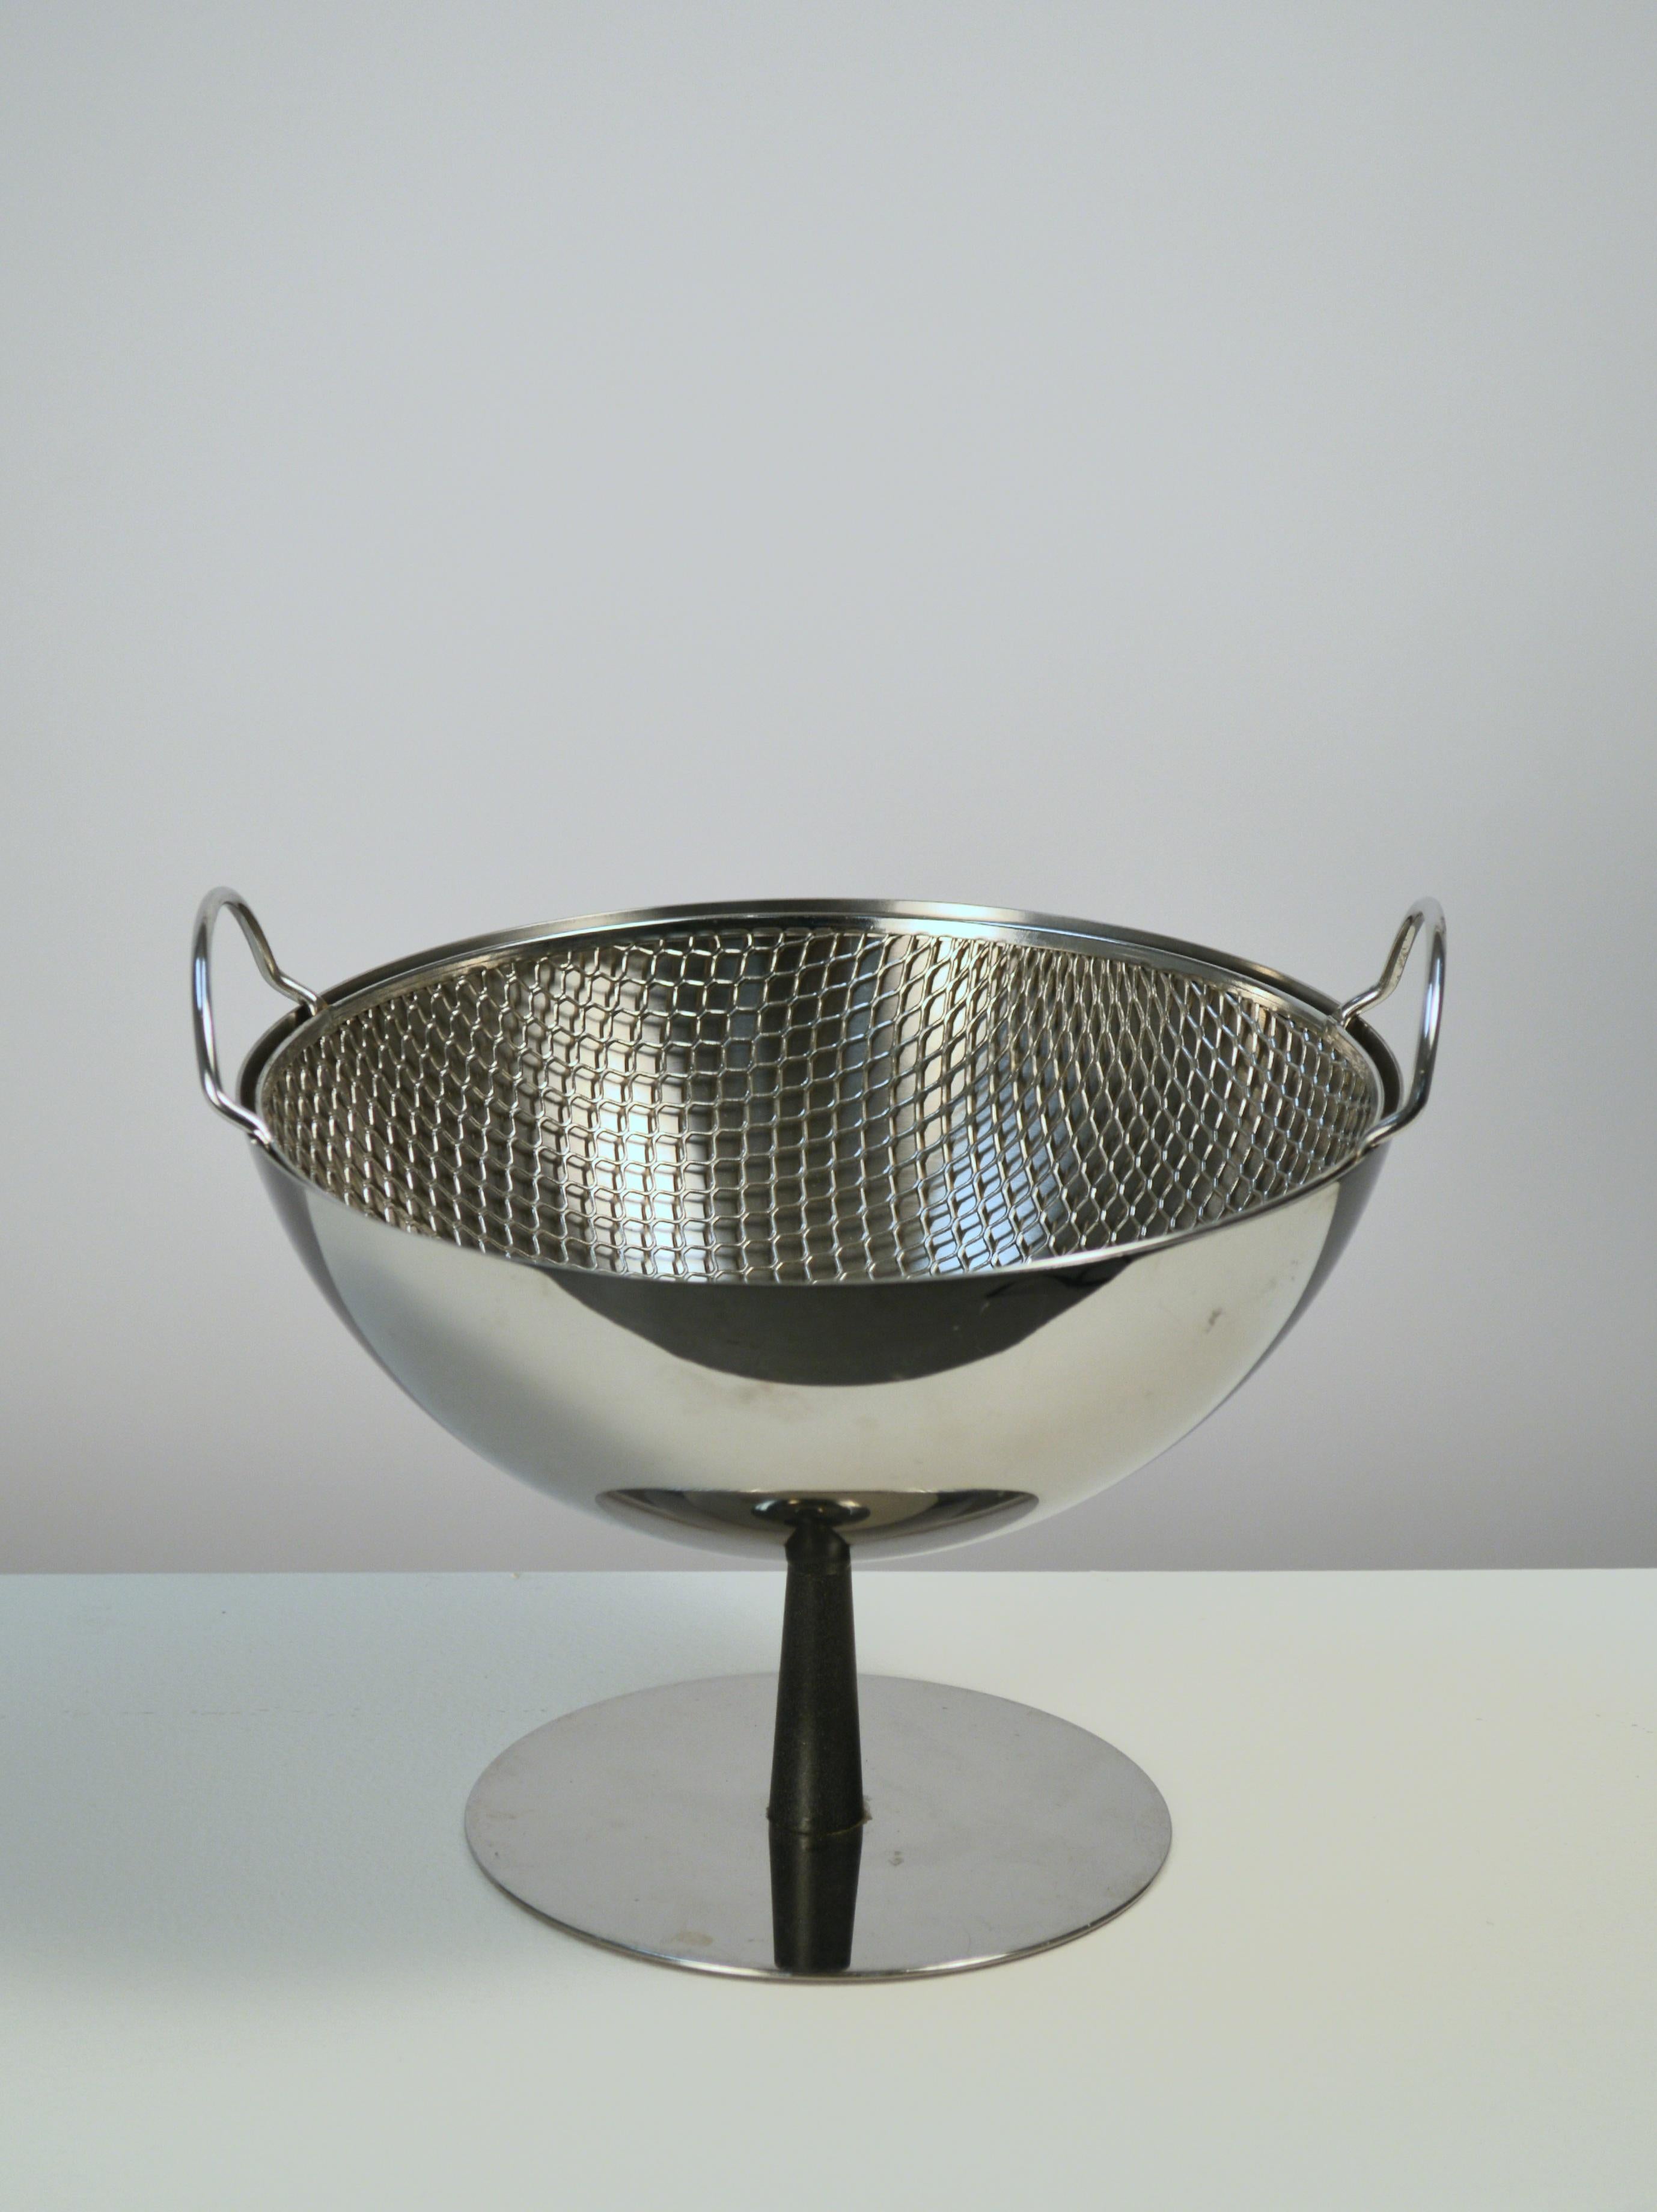 Post-modern stainless steel and aluminum fruit bowl designed by Achille Castiglioni in 1995, for Alessi Italy. Free standing dish features a built-in stainless steel strainer for rinsing fresh fruits, and freshness maintaining air circulation. This